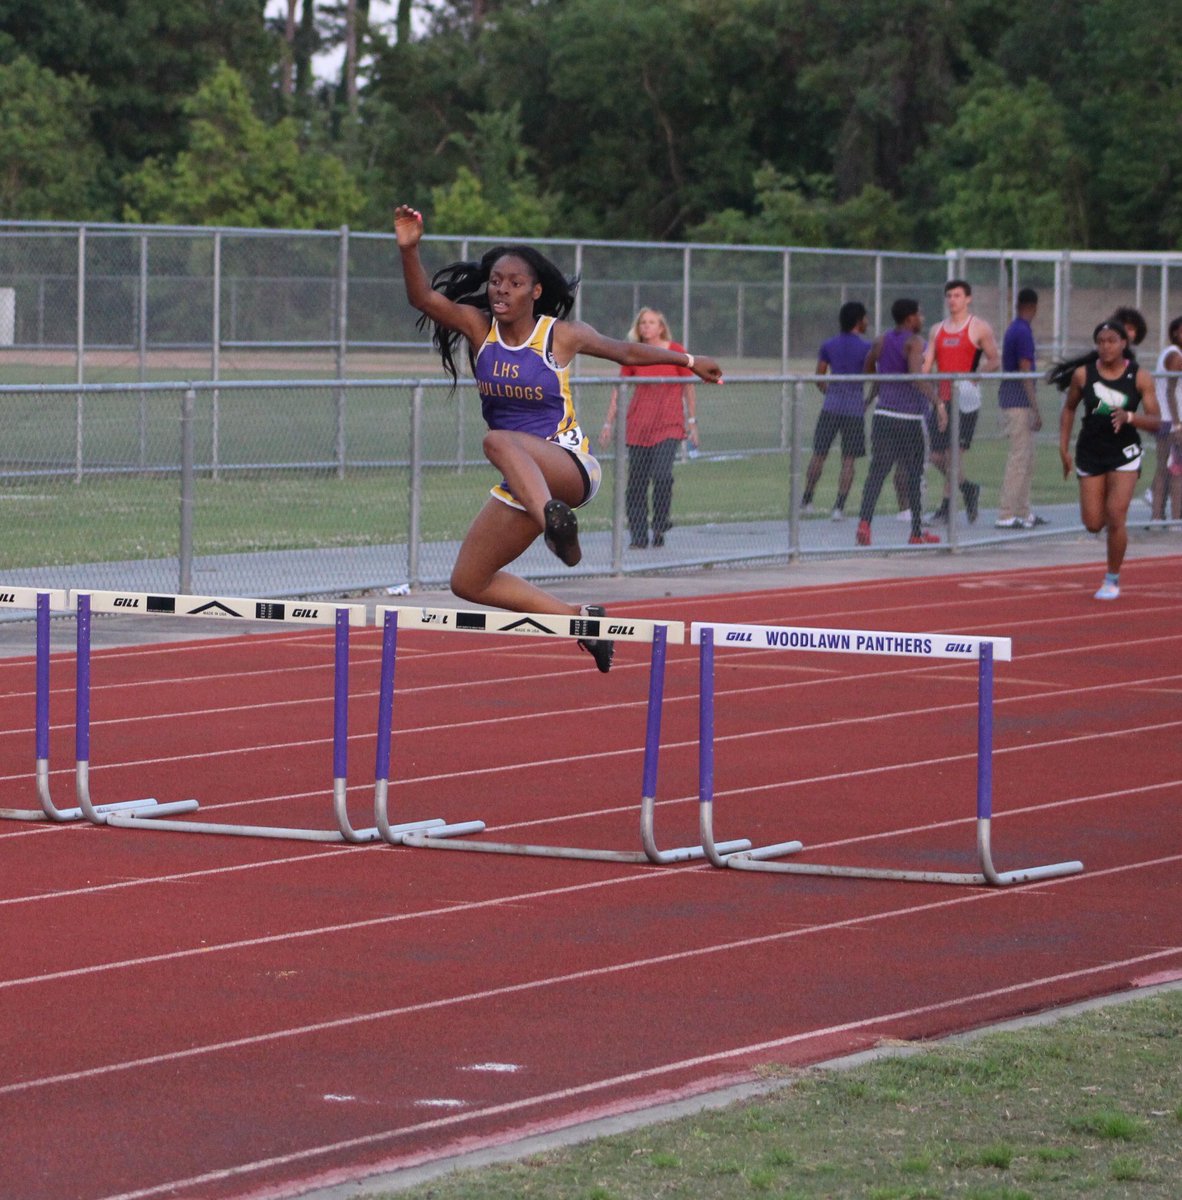 well ya girl going to state💜💜💜🍽. #STATEQUALIFIER #300hurdles. #LSU!!